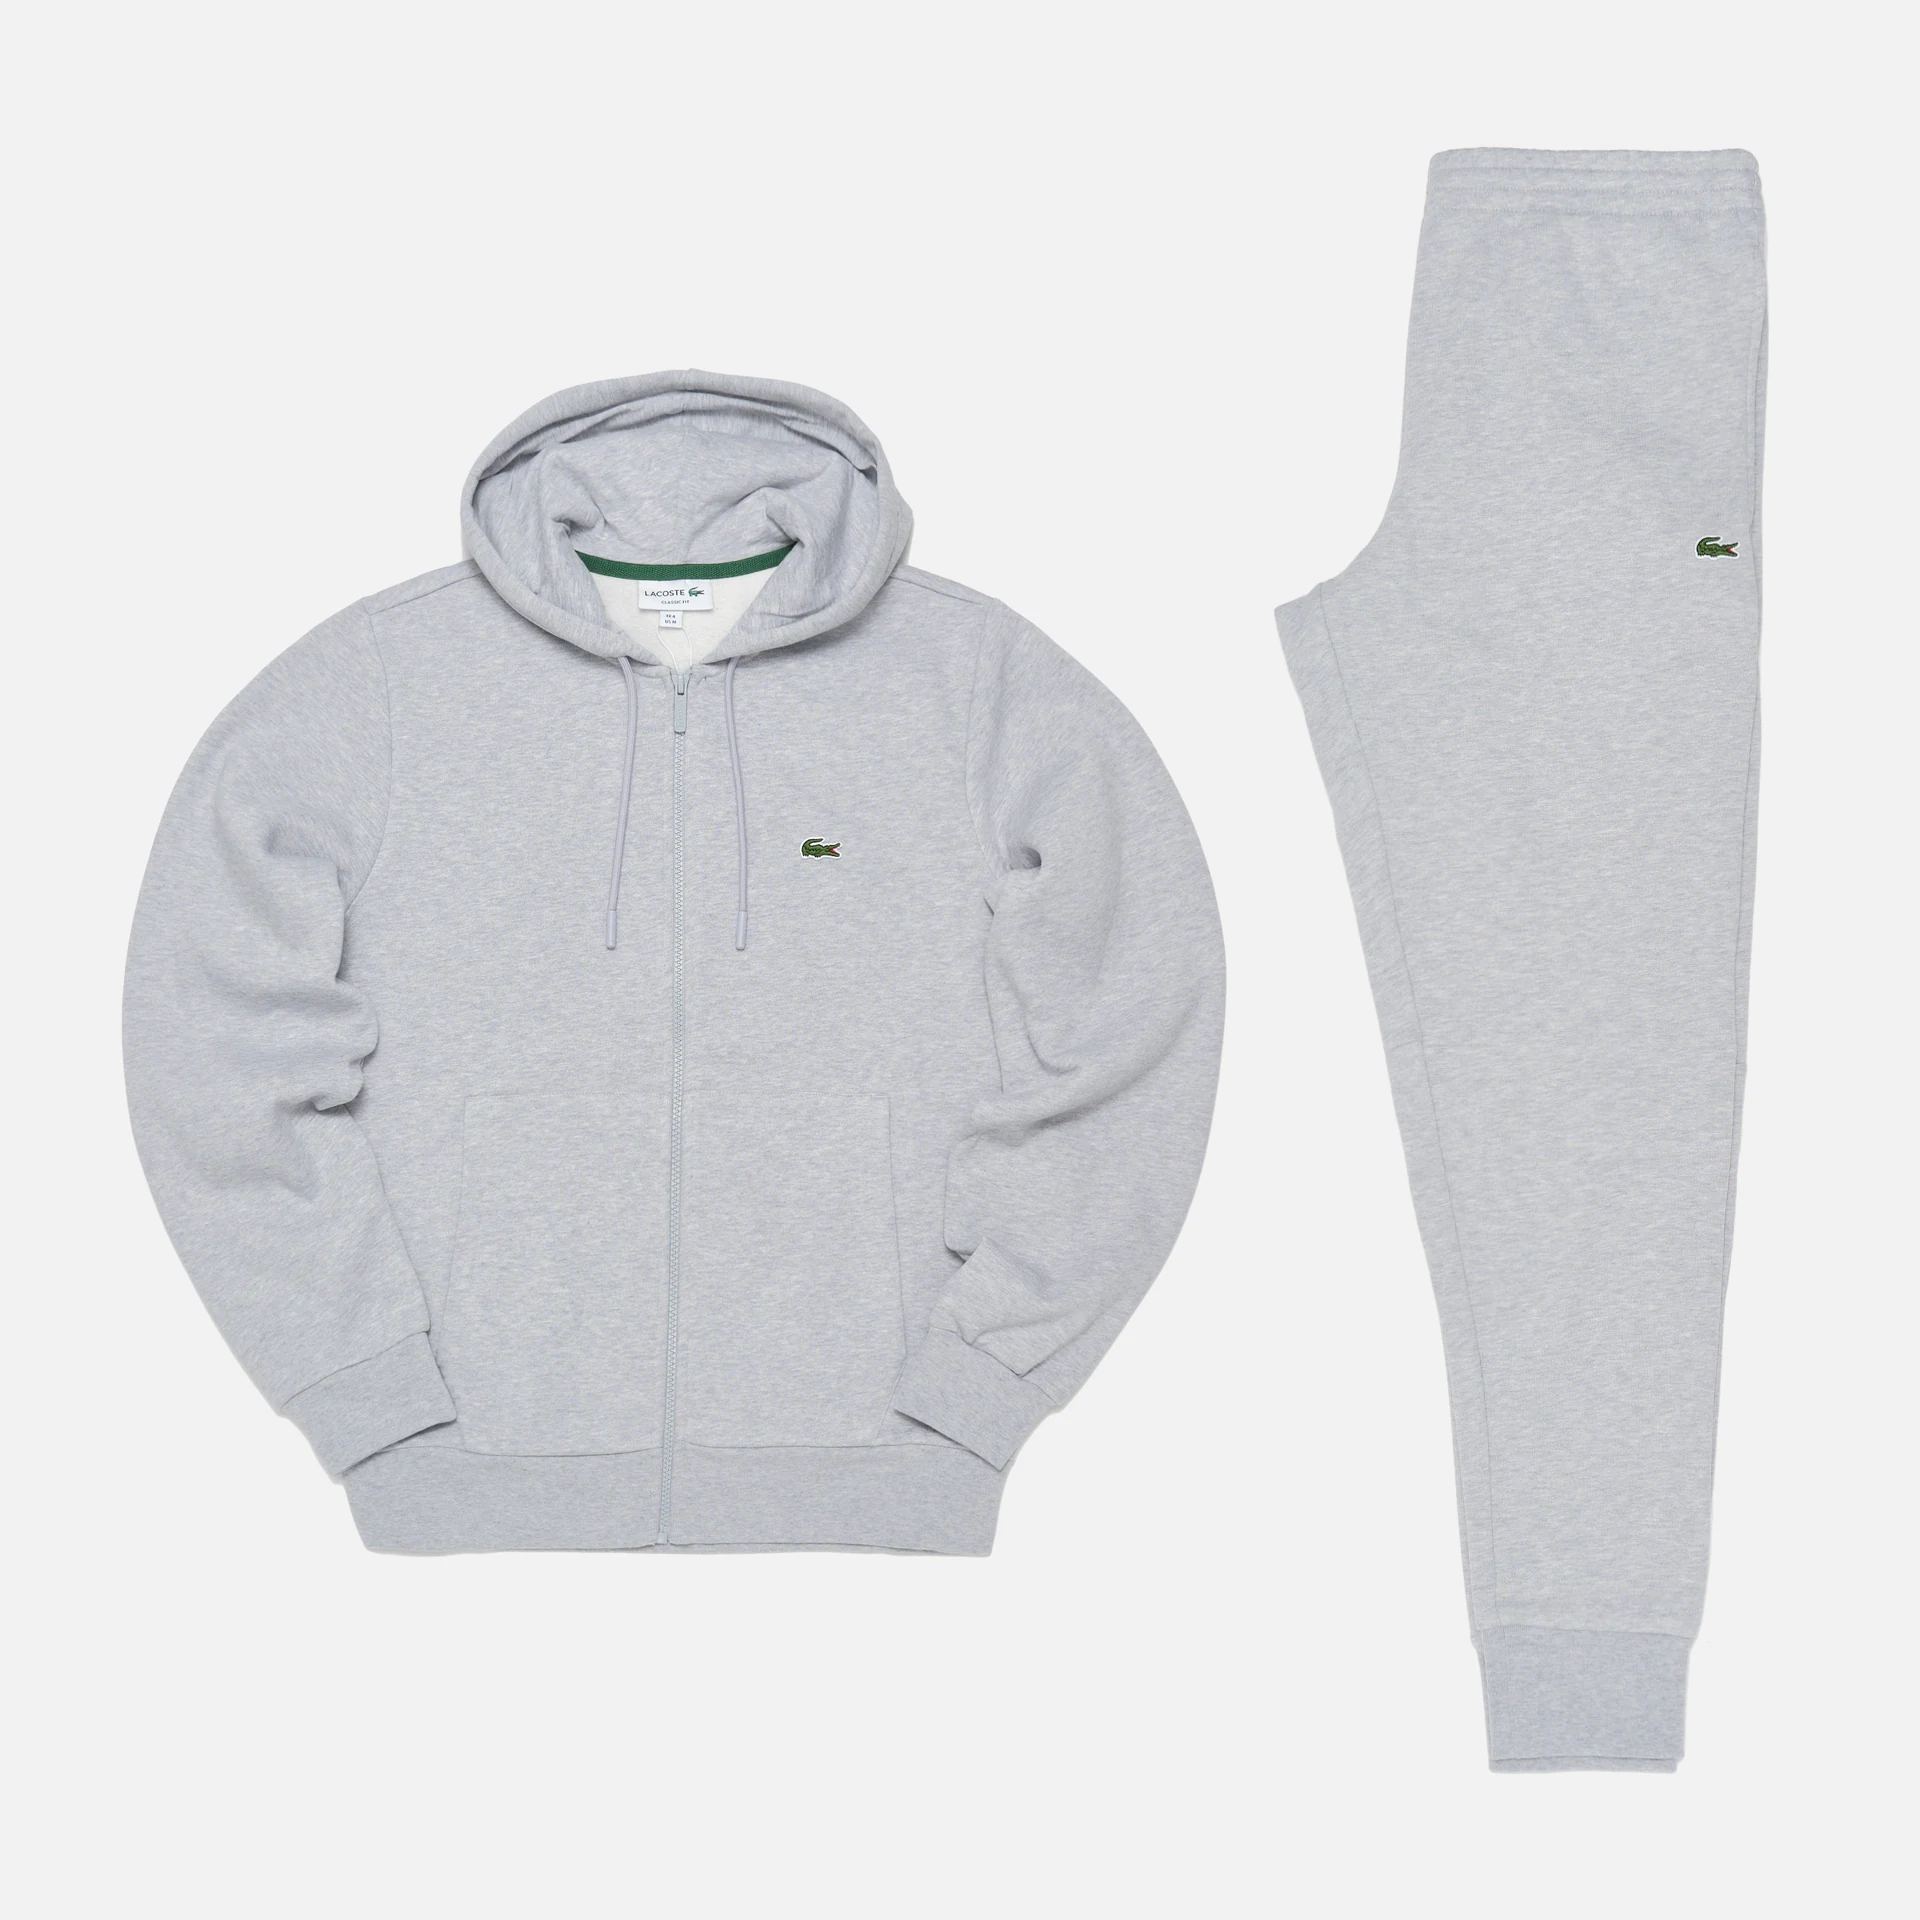 Lacoste Hooded Sweatsuit Silver Chine